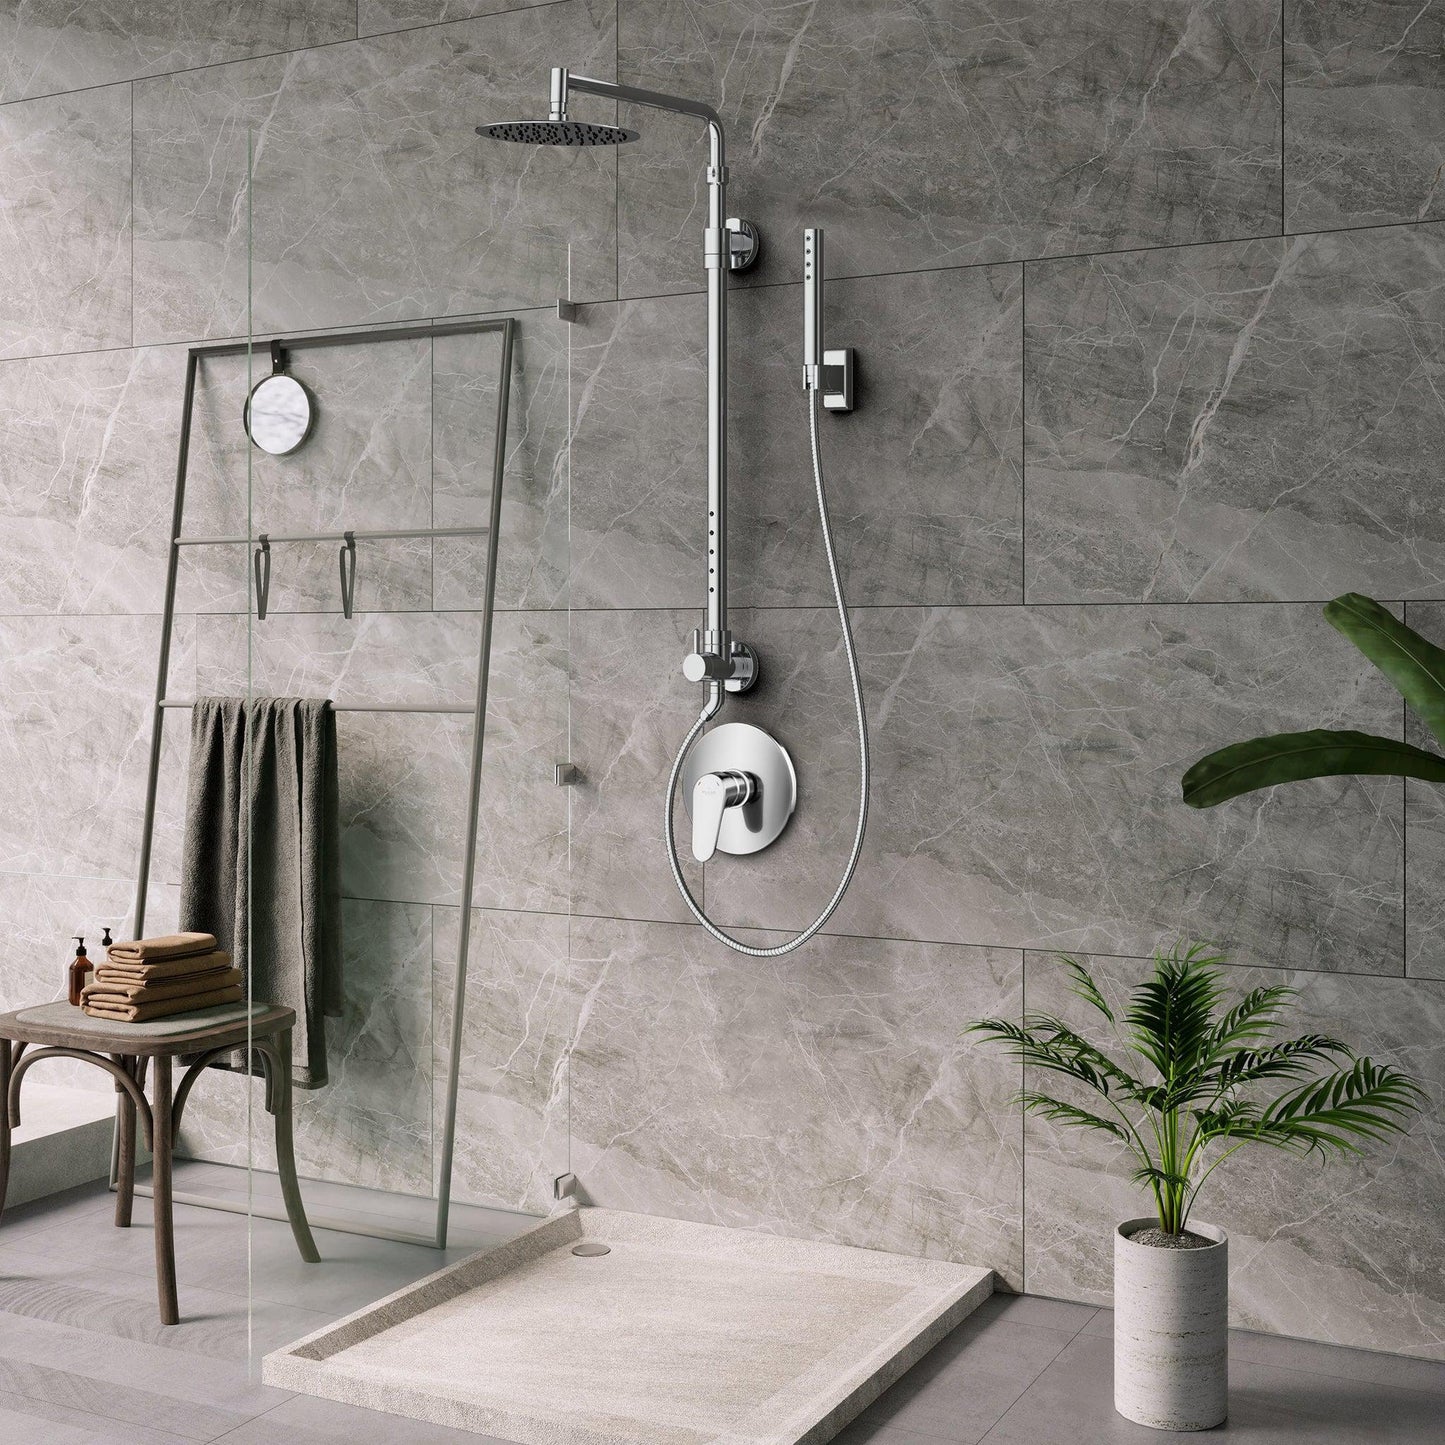 PULSE ShowerSpas Atlantis 1.8 GPM Rain Shower System in Chrome Finish With 5-Power Nozzle Spray and Single Function Hand Shower